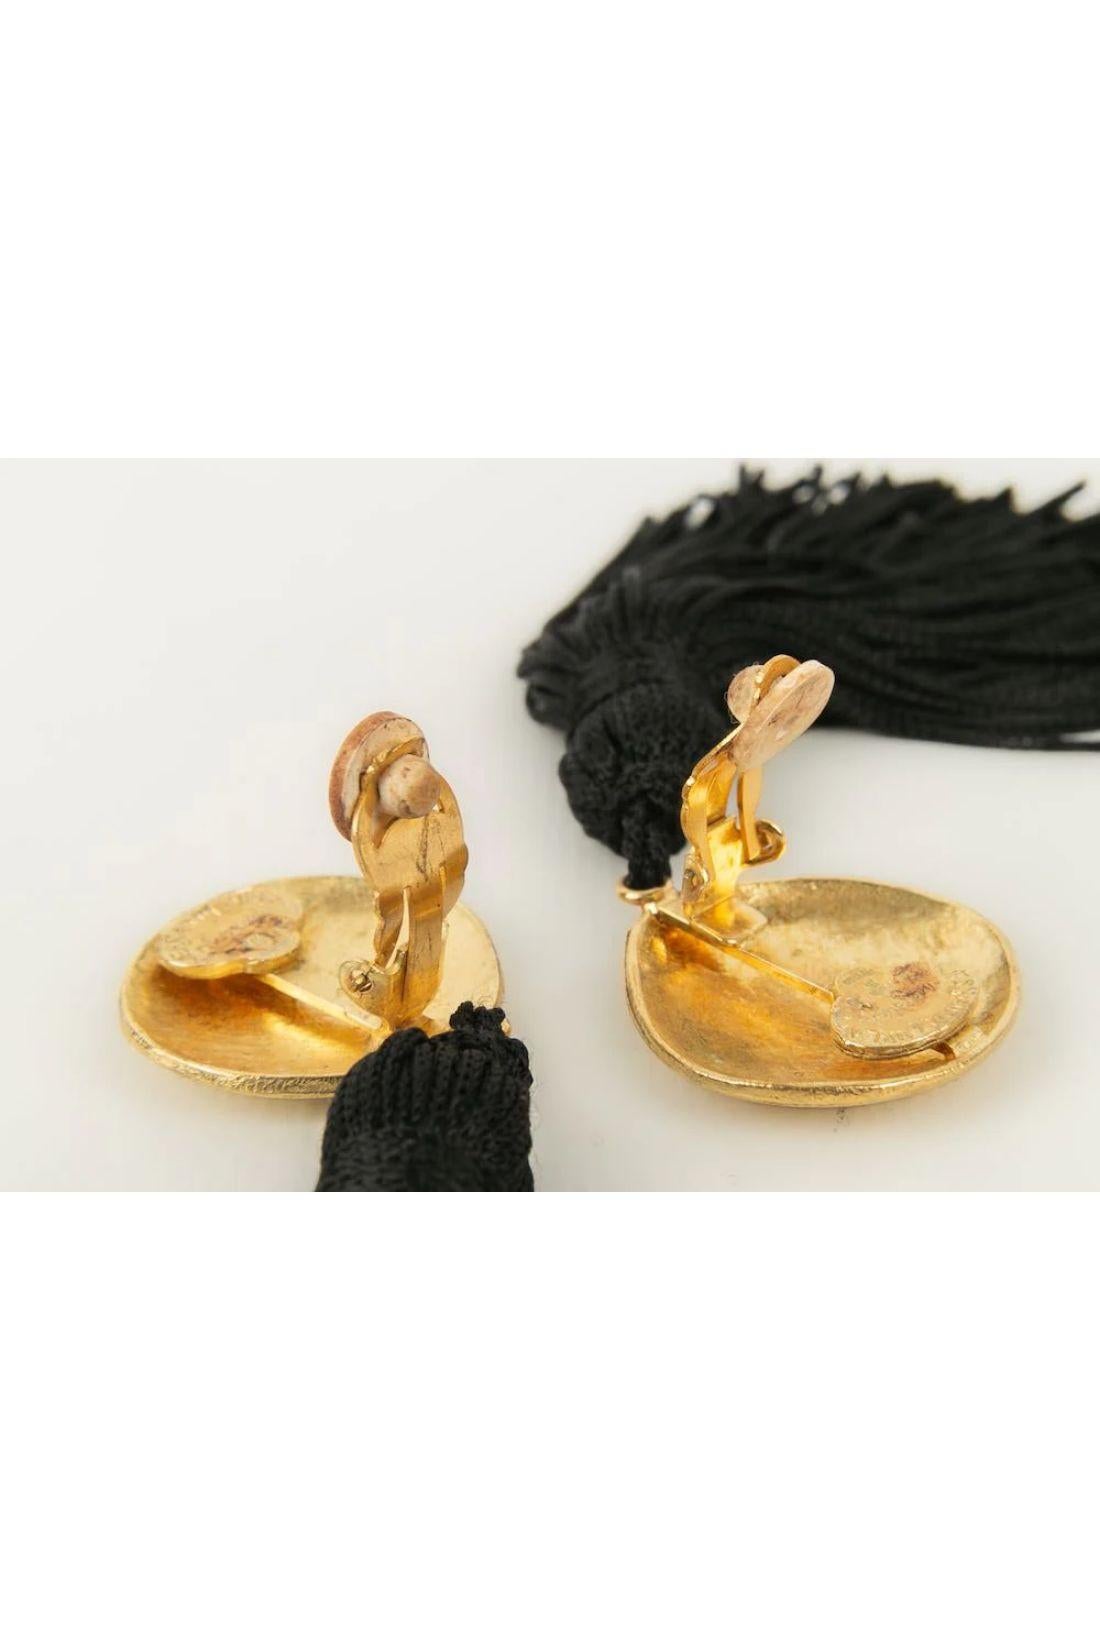 Yves Saint Laurent Gold Plated Metal and Black Trimmings Earrings For Sale 2